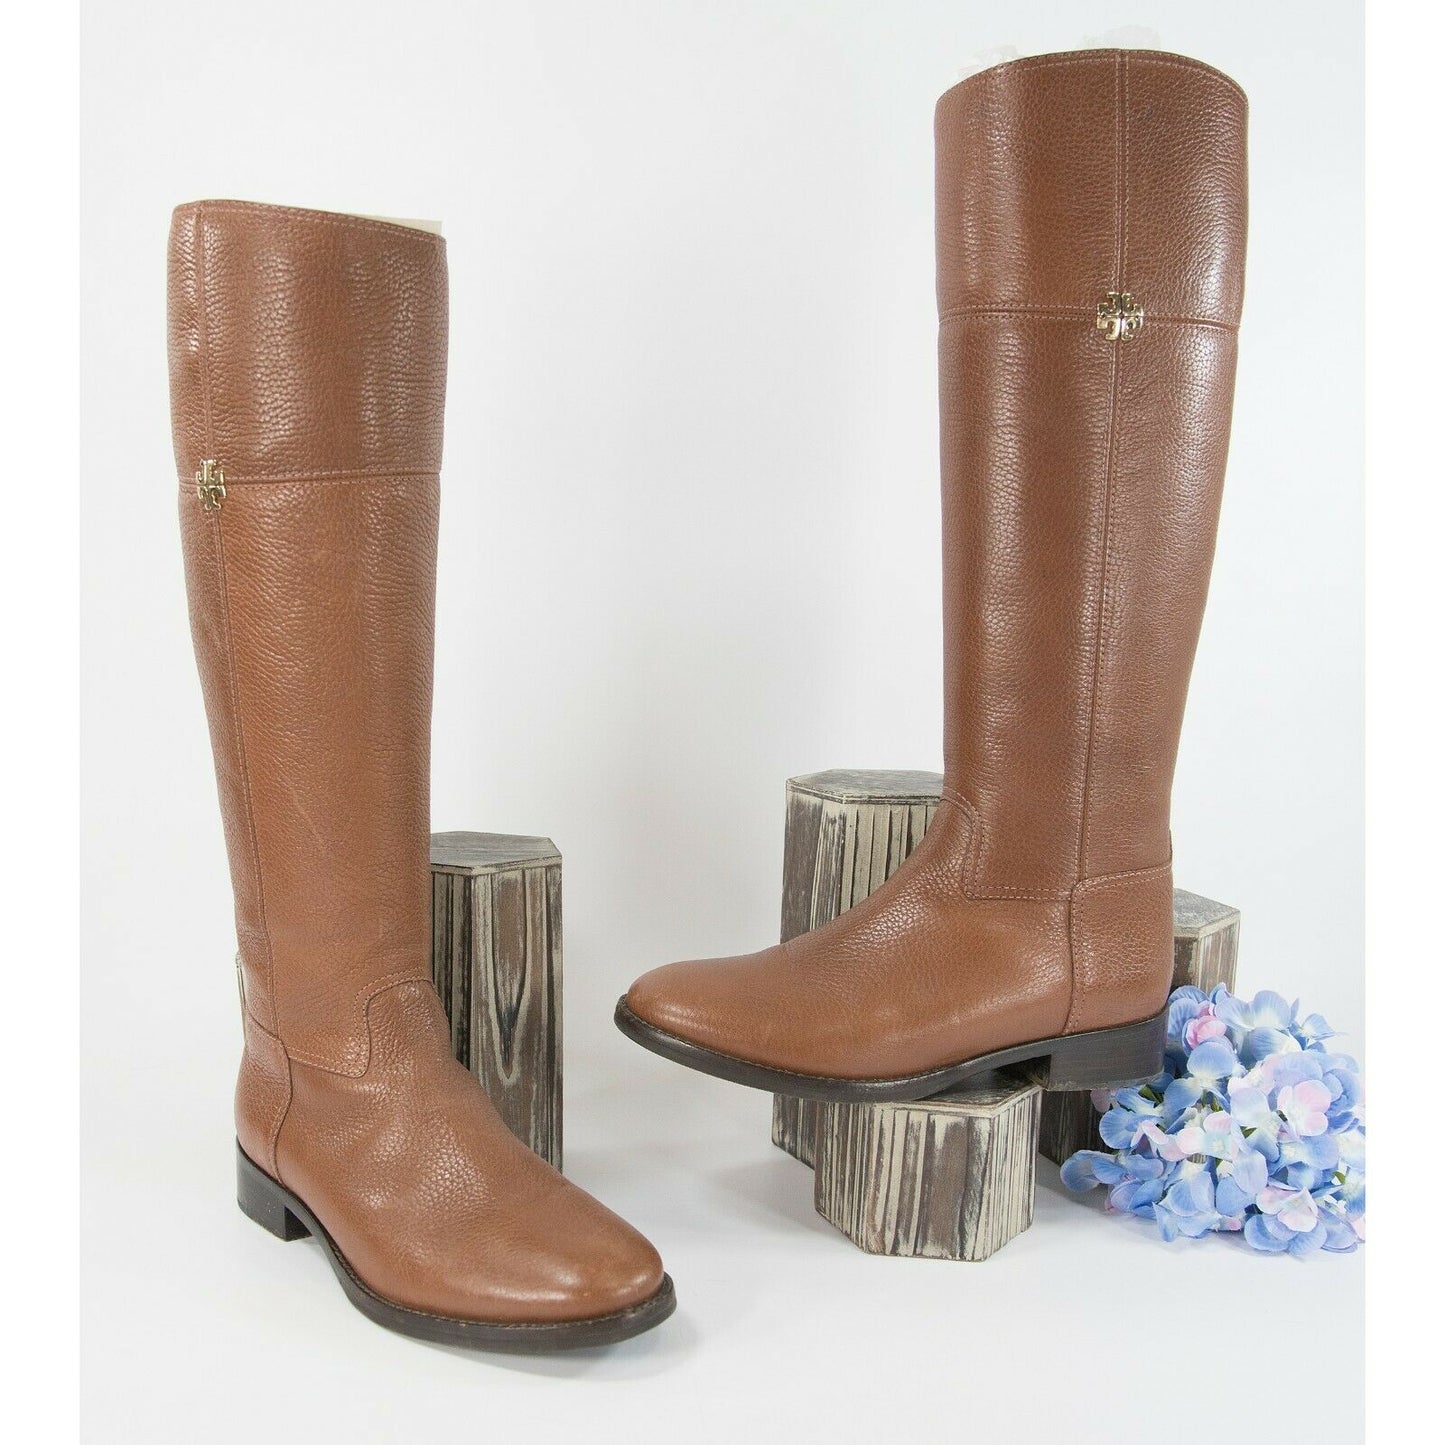 Tory Burch Rustic Brown Jolie Pebbled Leather Tall Riding Boots Sz 6